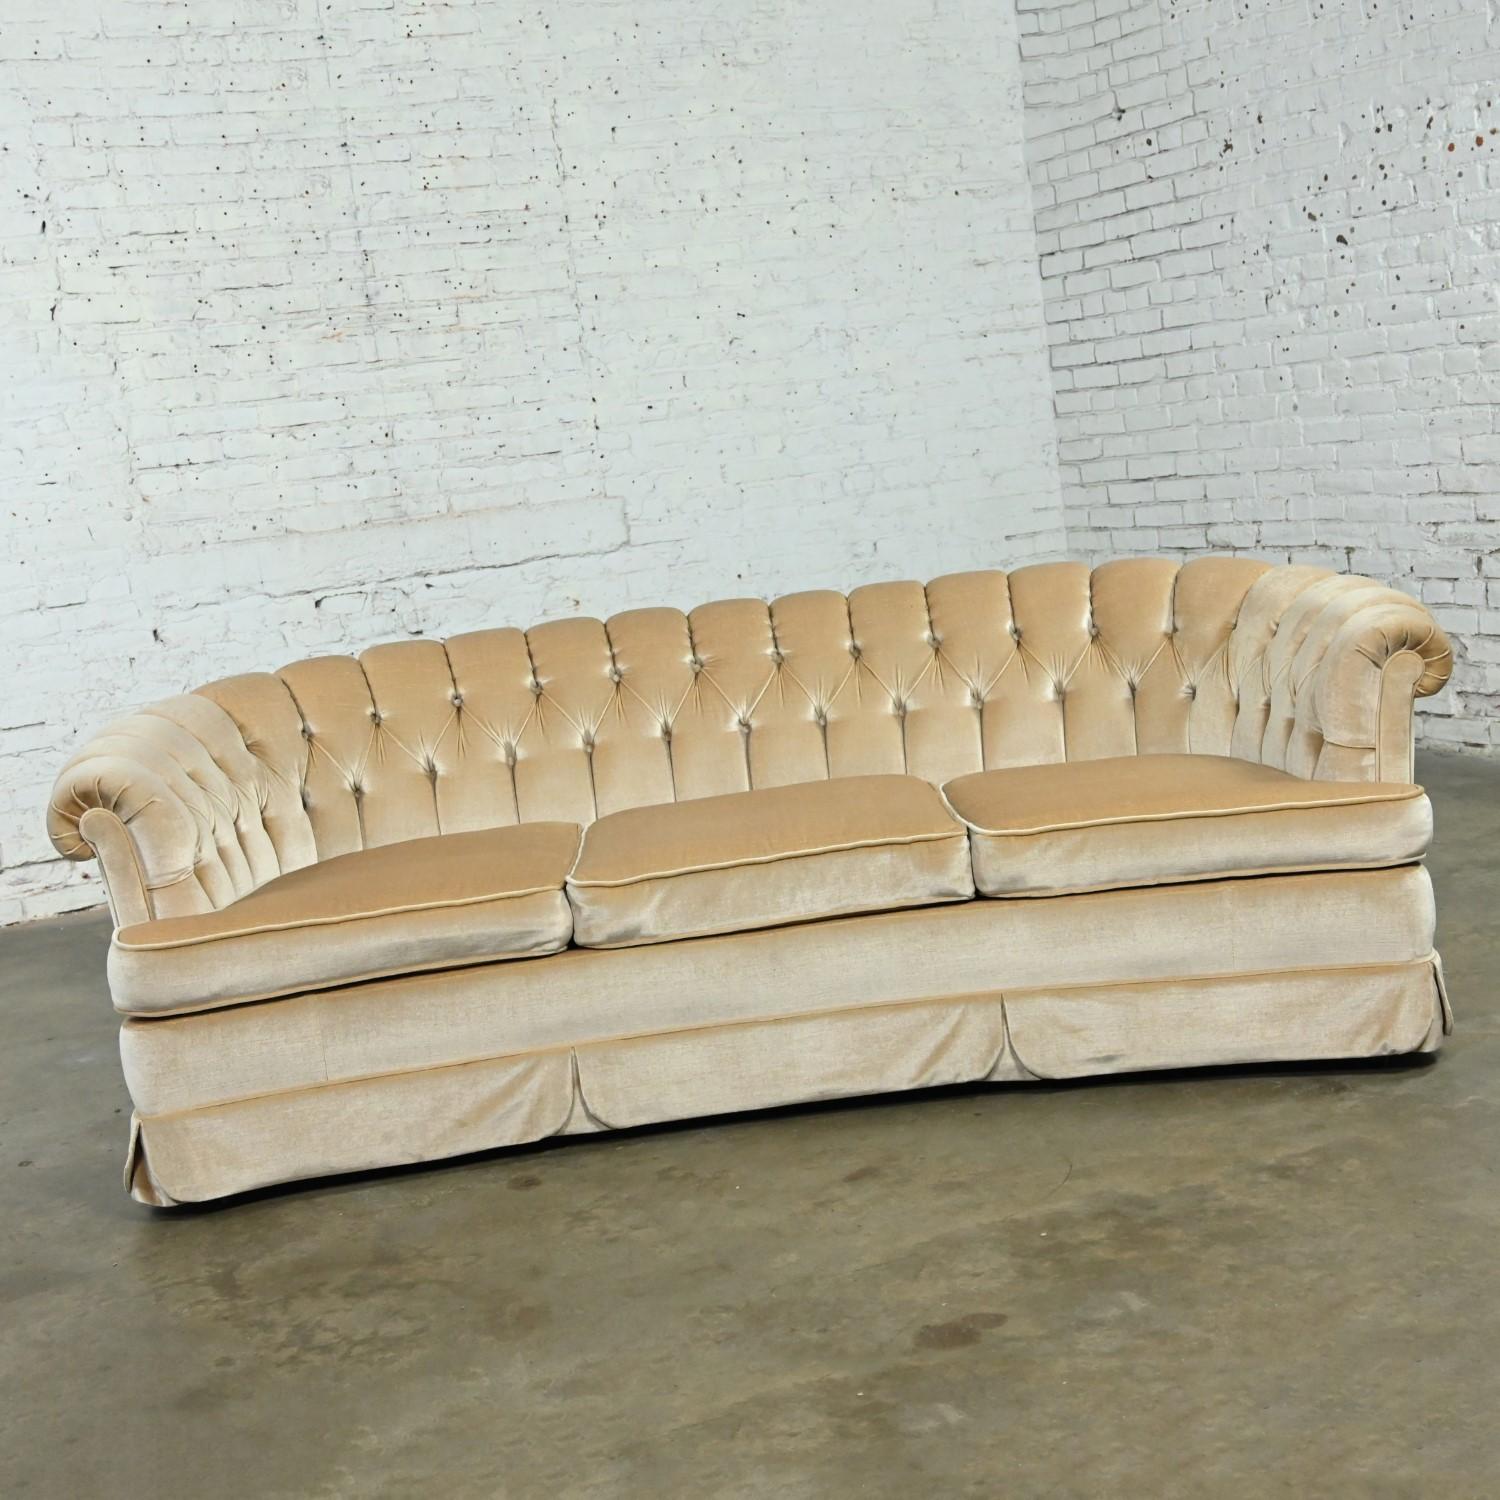 American Hollywood Regency Curved Sofa Beige Velvet Button Tufted Lee Harvey for Maddox 